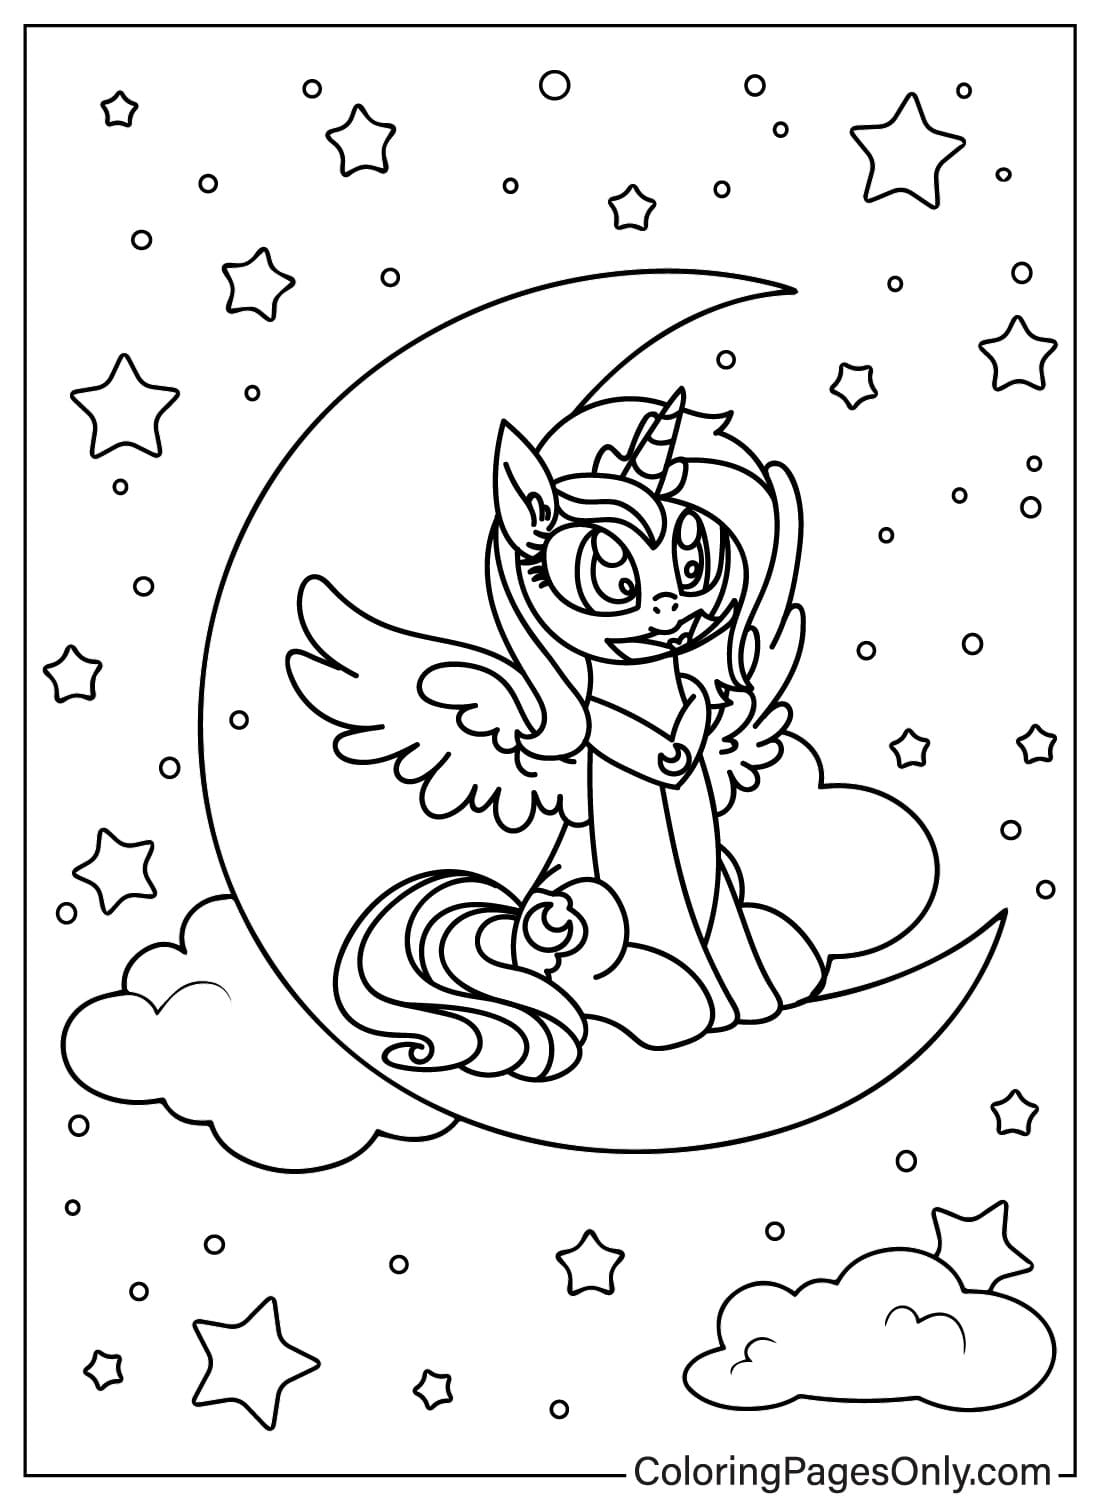 Color Page Princess Luna Sitting on the Moon from Princess Luna